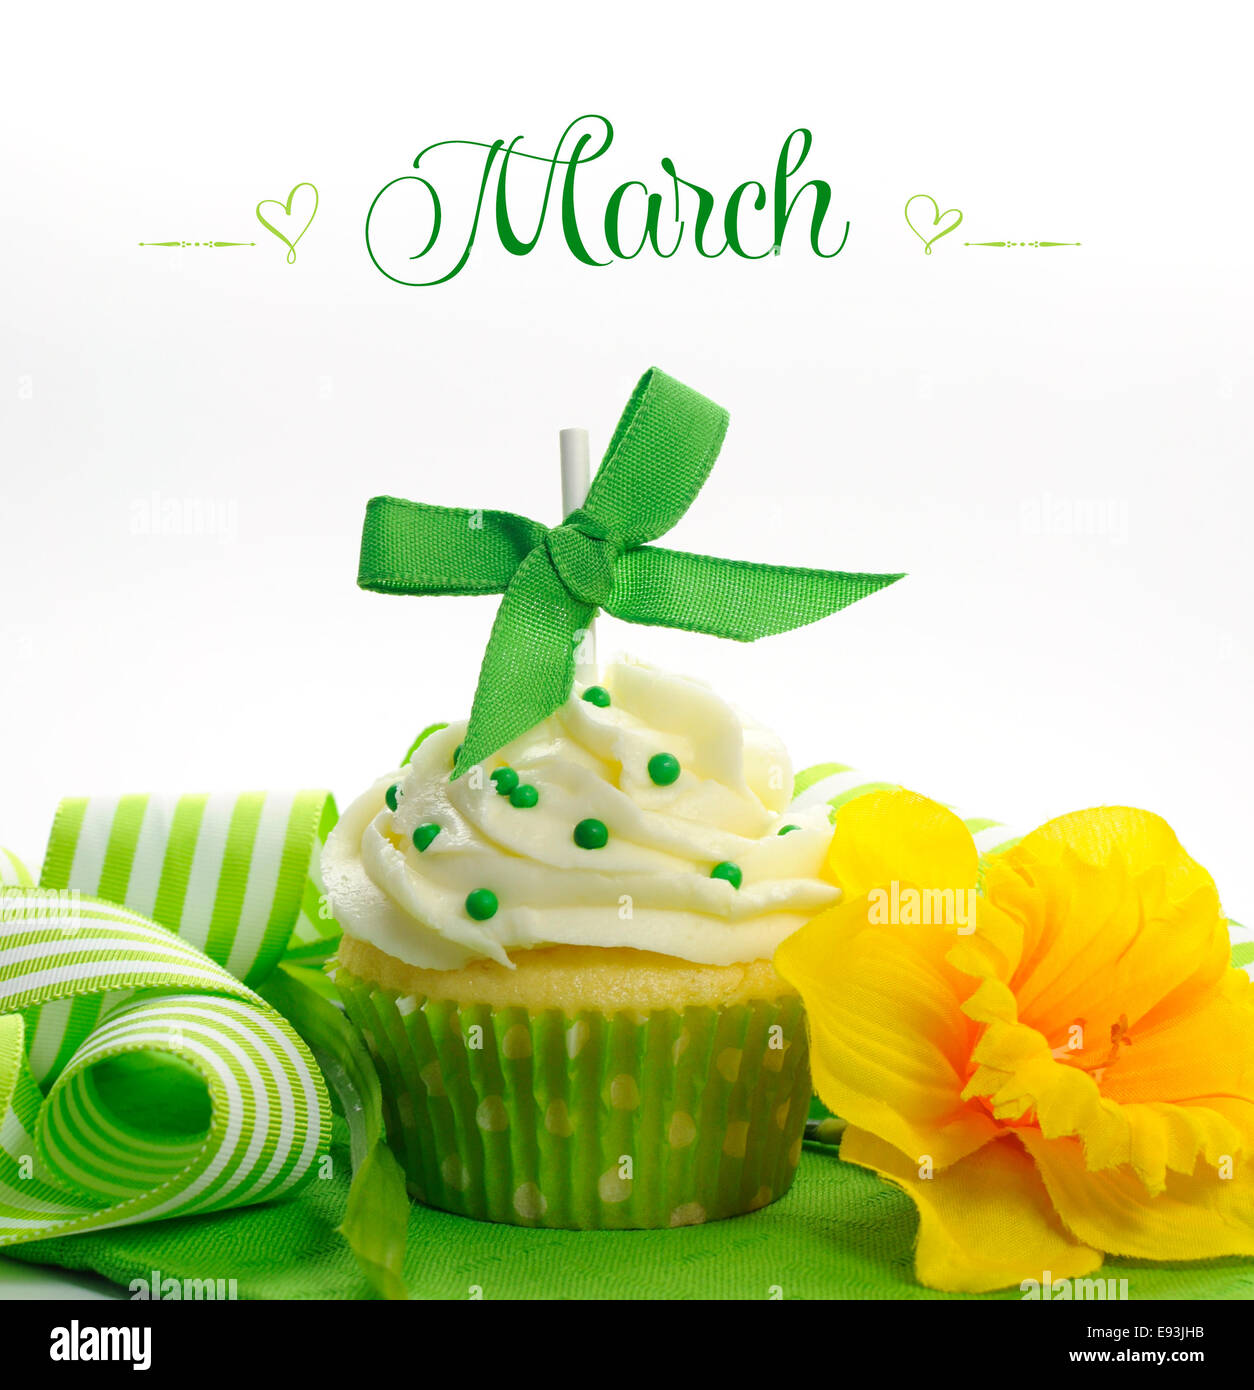 Beautiful green and yellow Spring theme cupcake with daffodils and decorations for the month of March Stock Photo